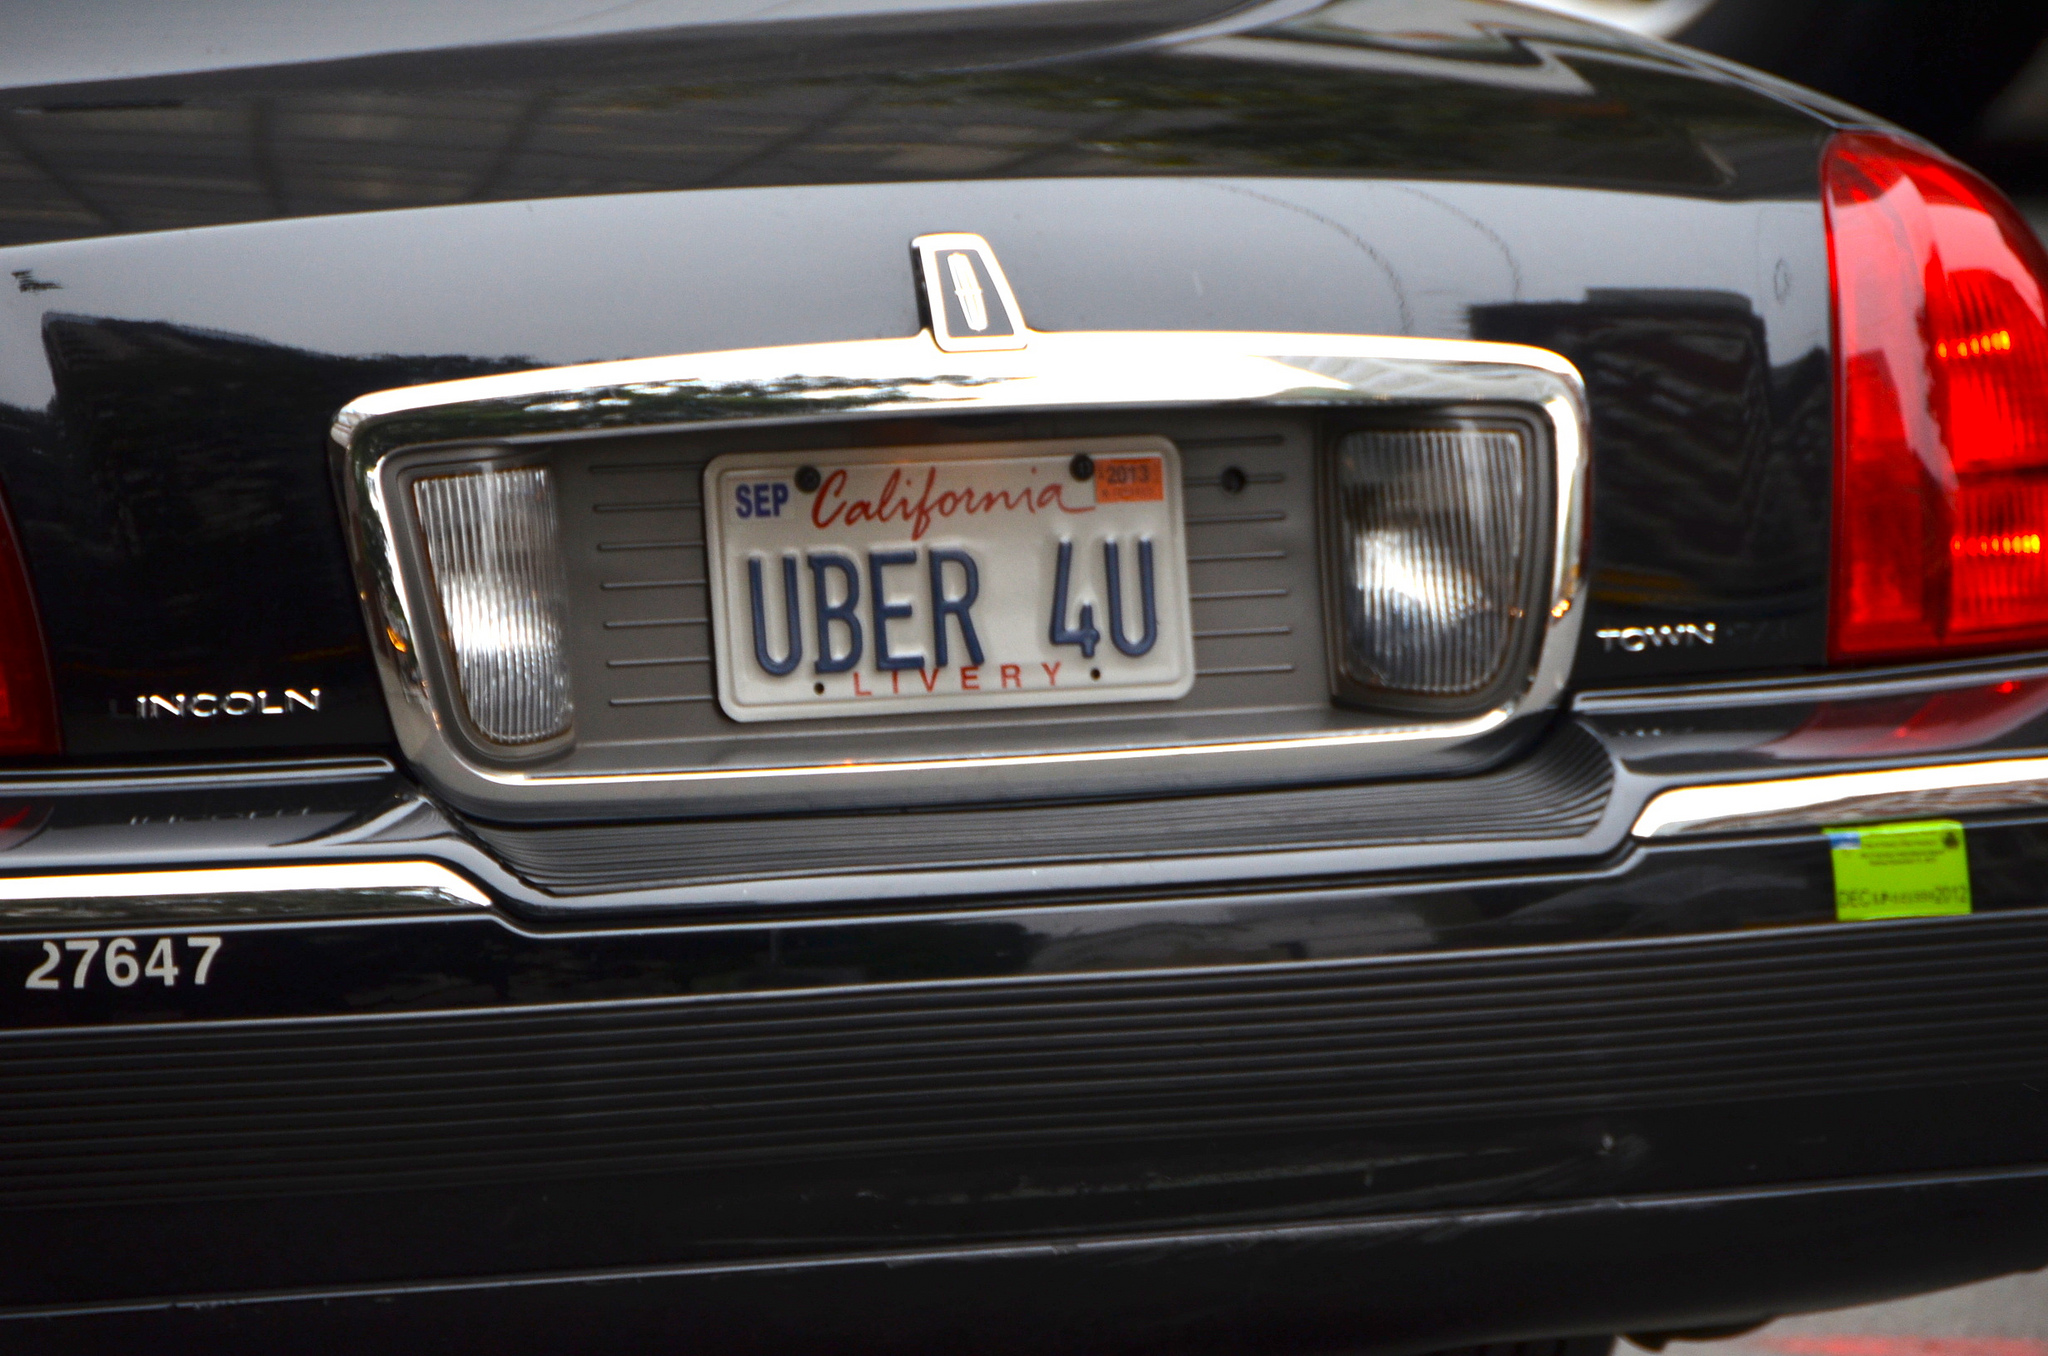 Survey Says: Uber Overtakes Taxis As The Most Popular Ride For Business Travel